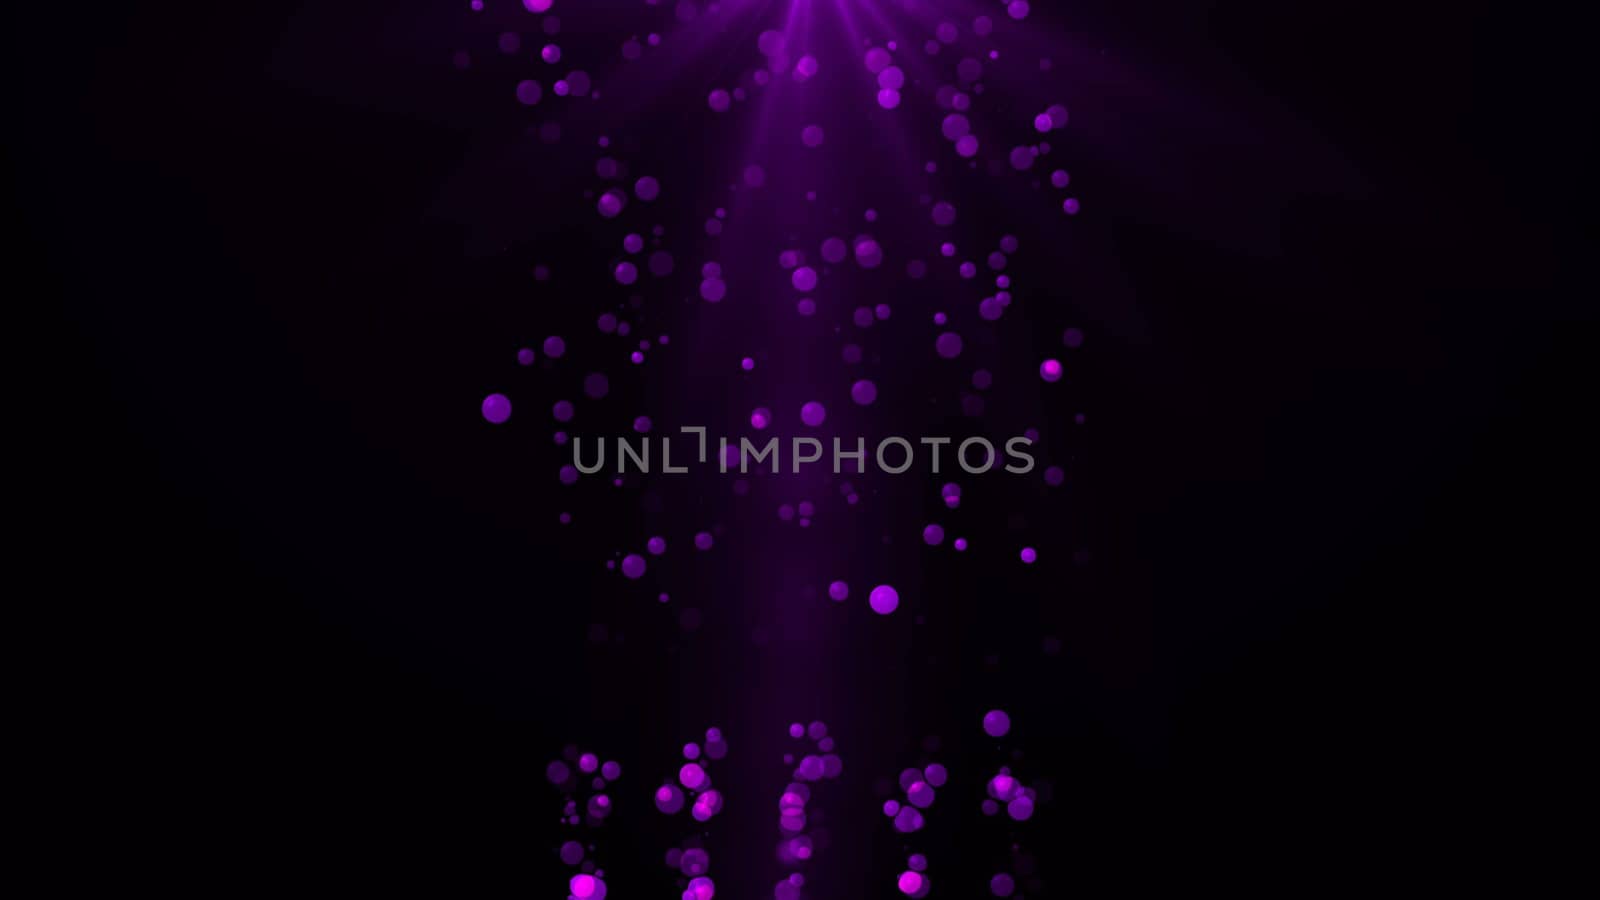 Abstract background with flickering Underwater bubbles by nolimit046